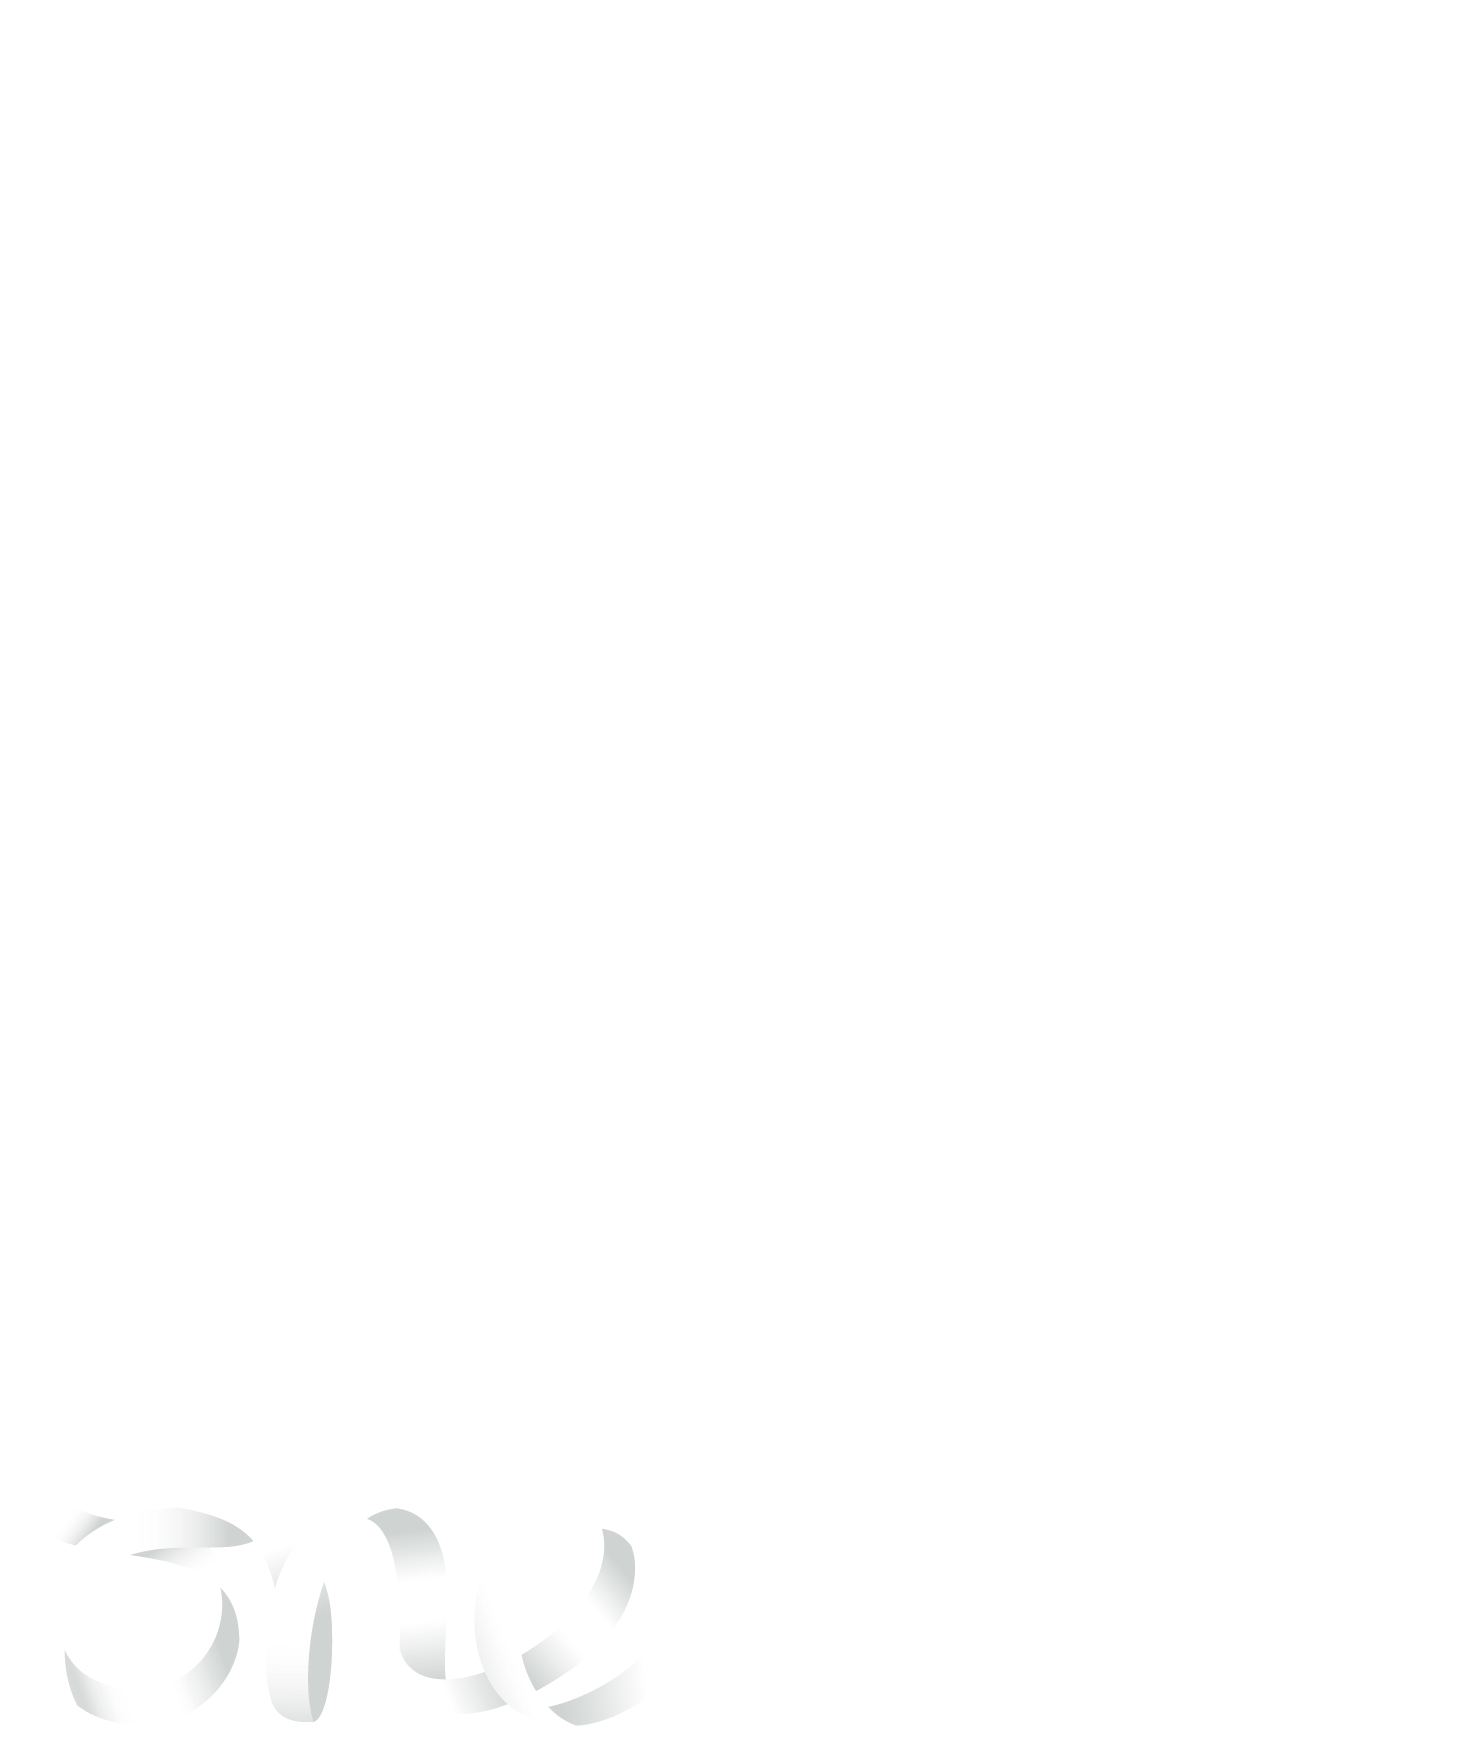 Nagasaki Peace-preneur Forum Powered by One Young World 2024